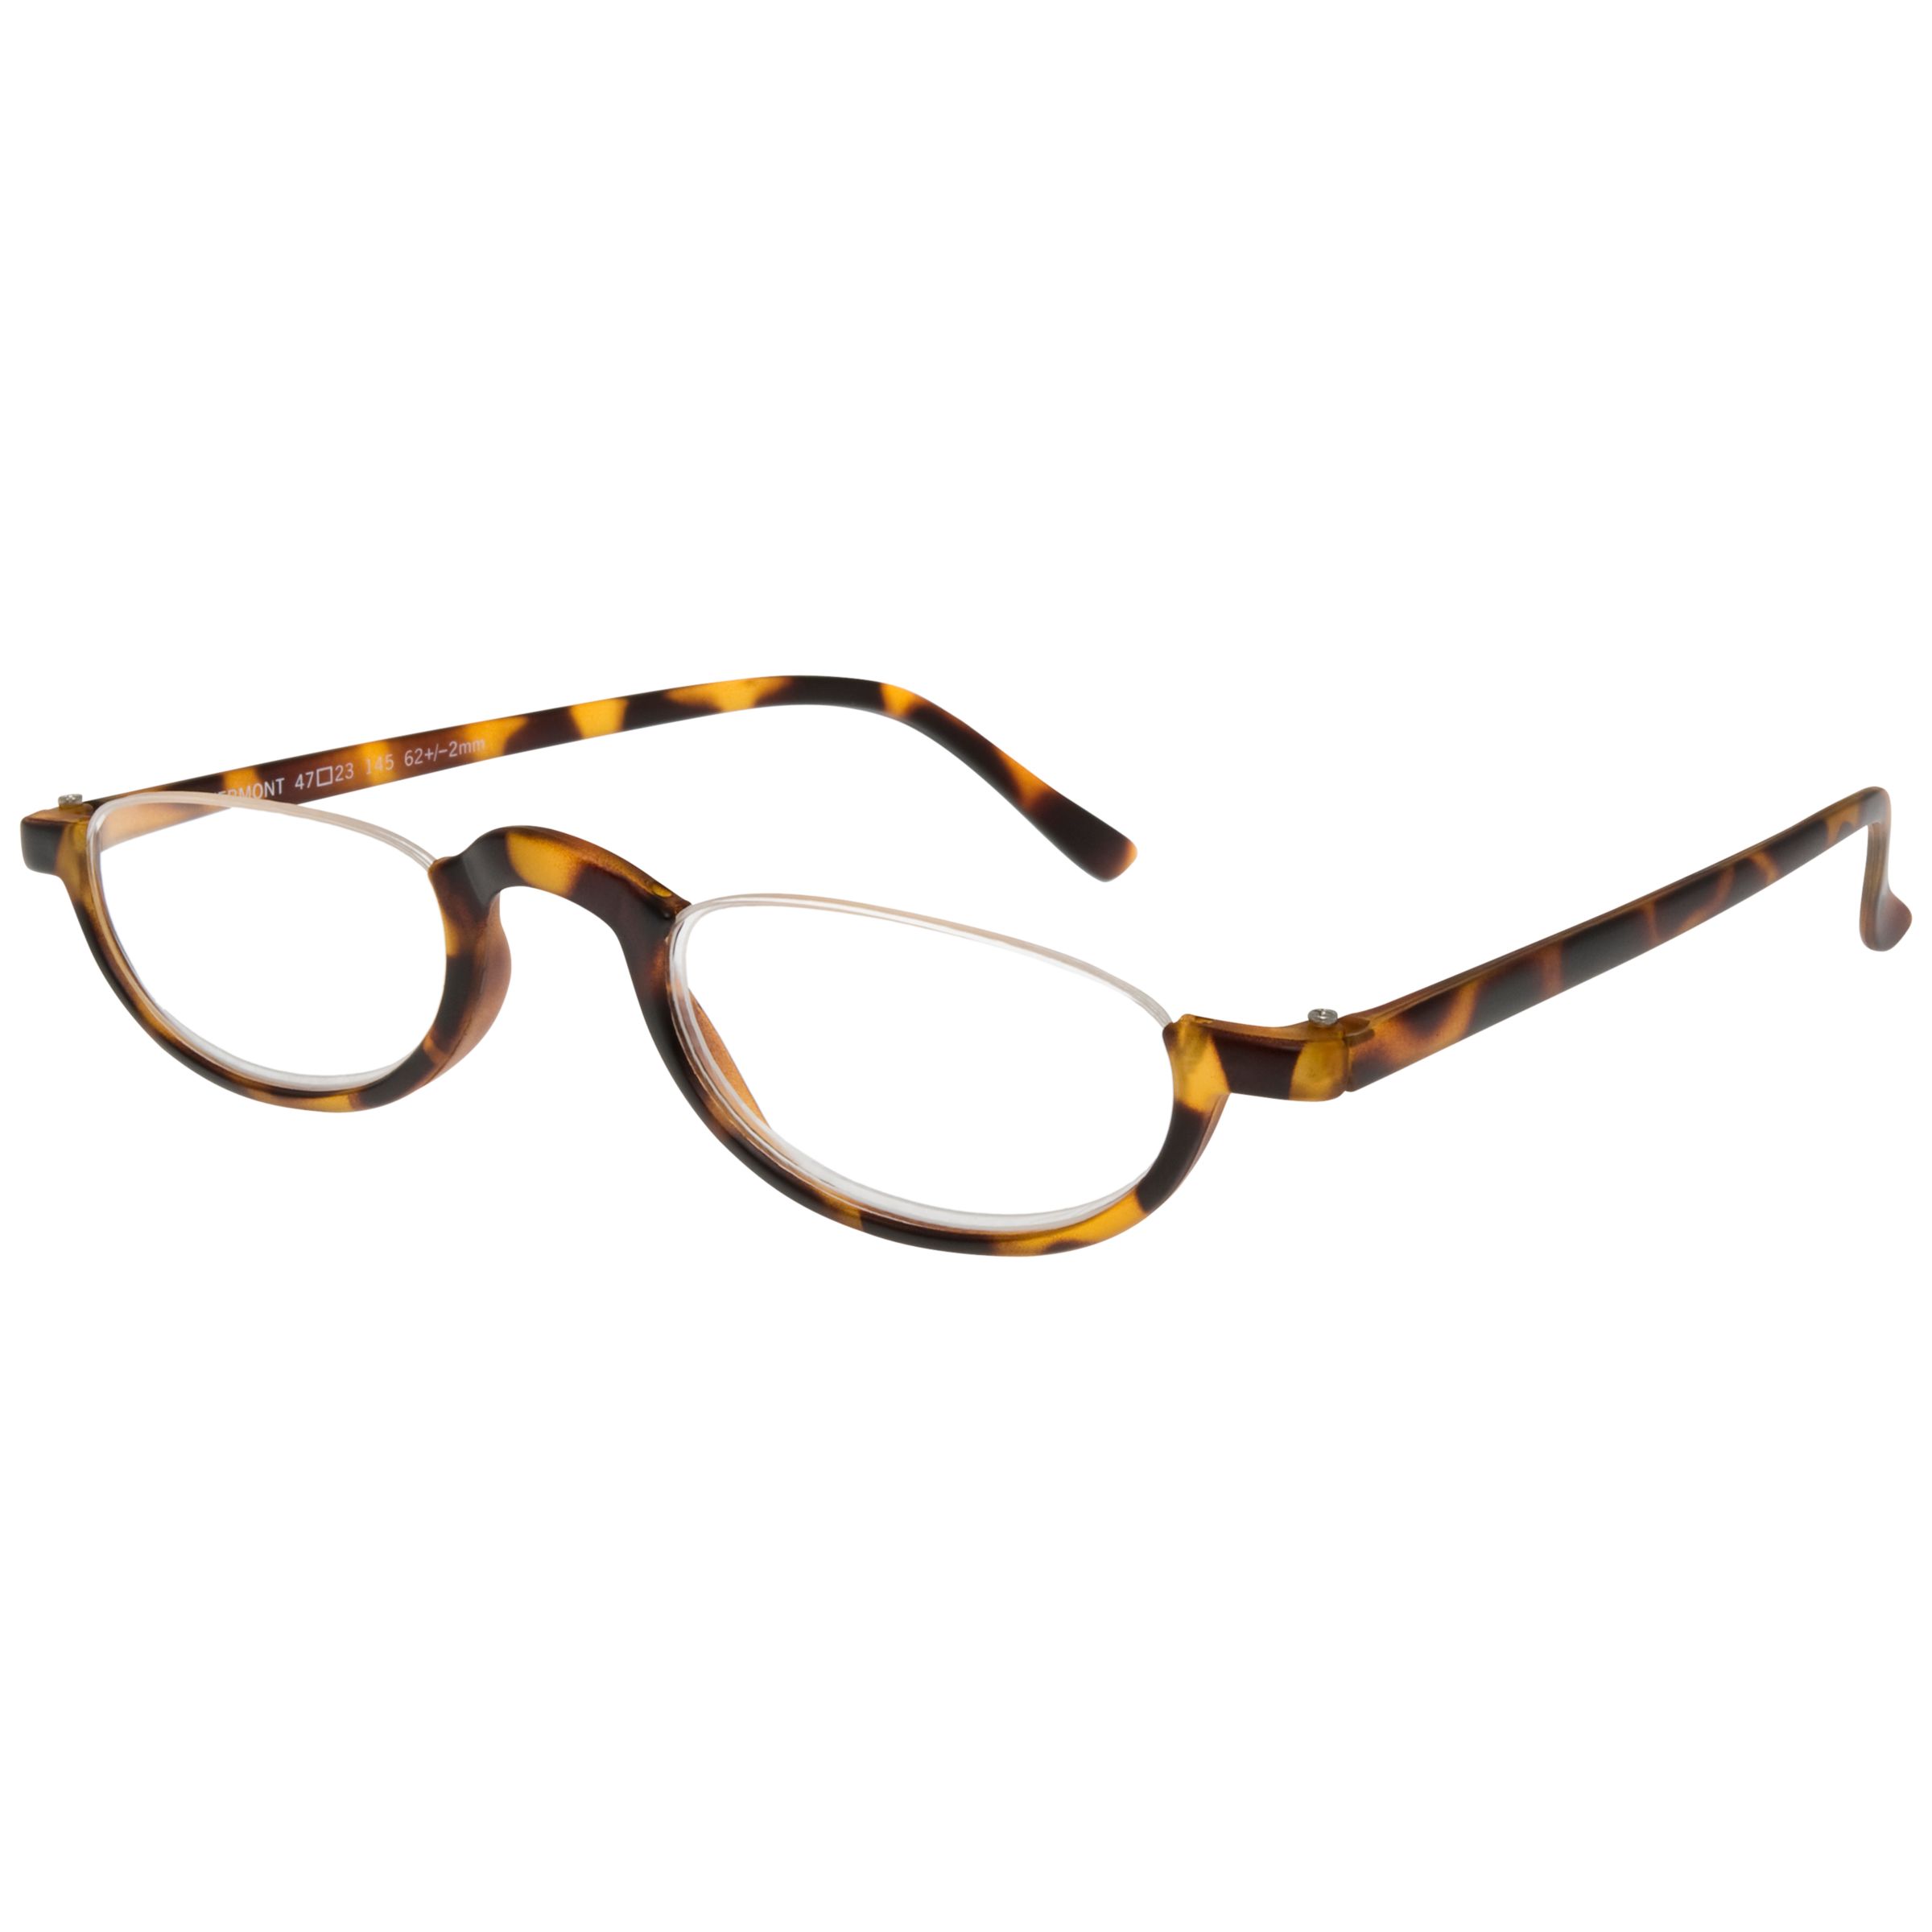 Magnif Eyes Vermont Unisex Ready Reader Glasses, Shell at John Lewis